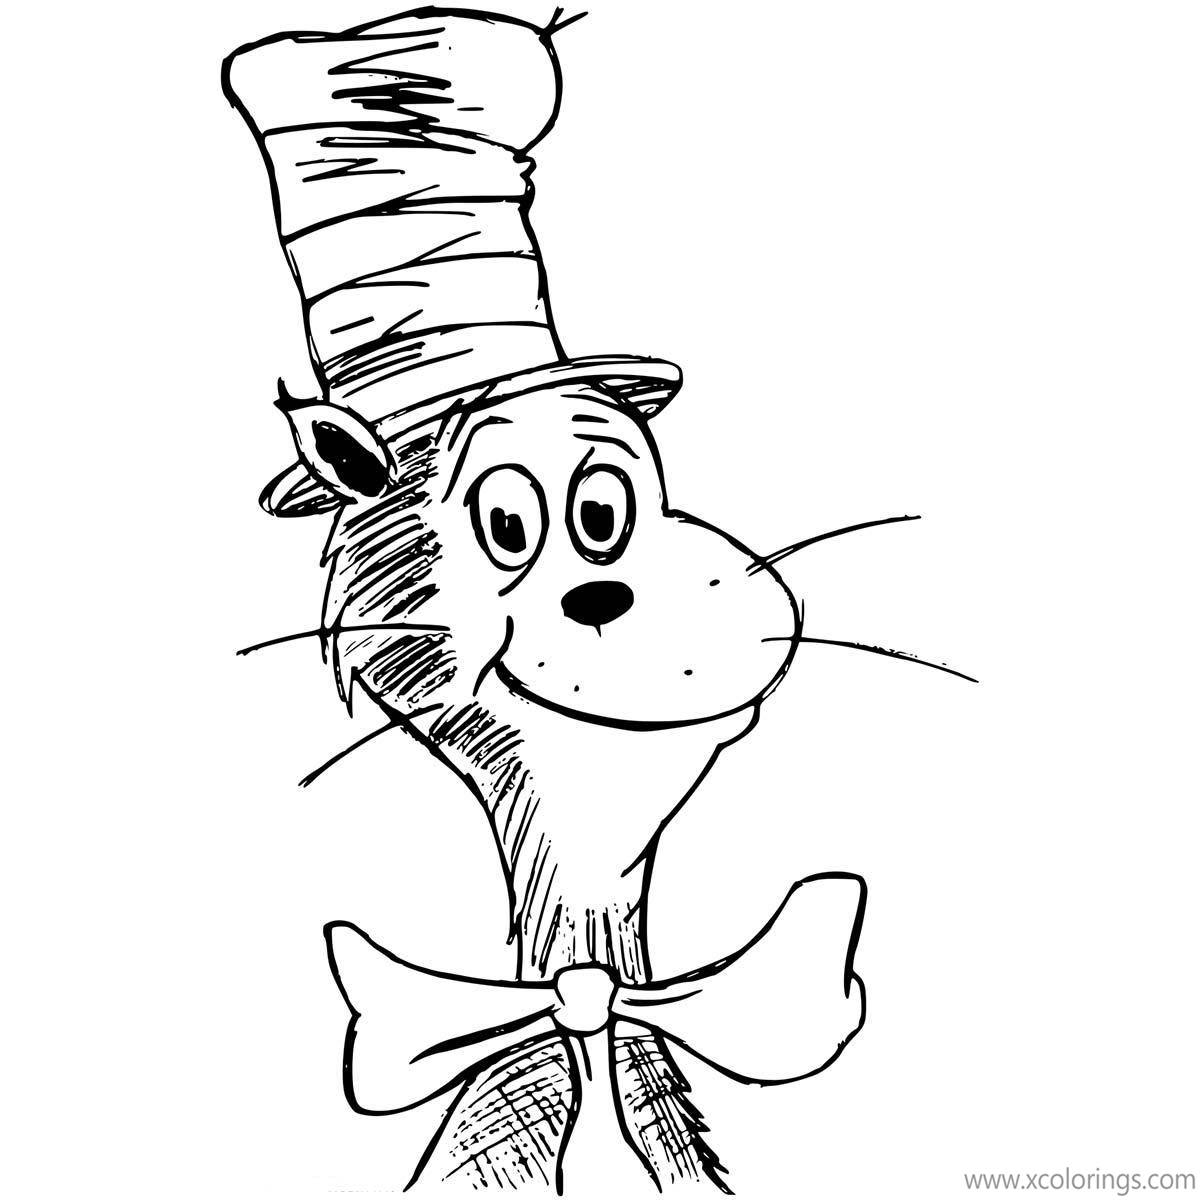 cat-in-the-hat-coloring-pages-for-preschoolers-xcolorings